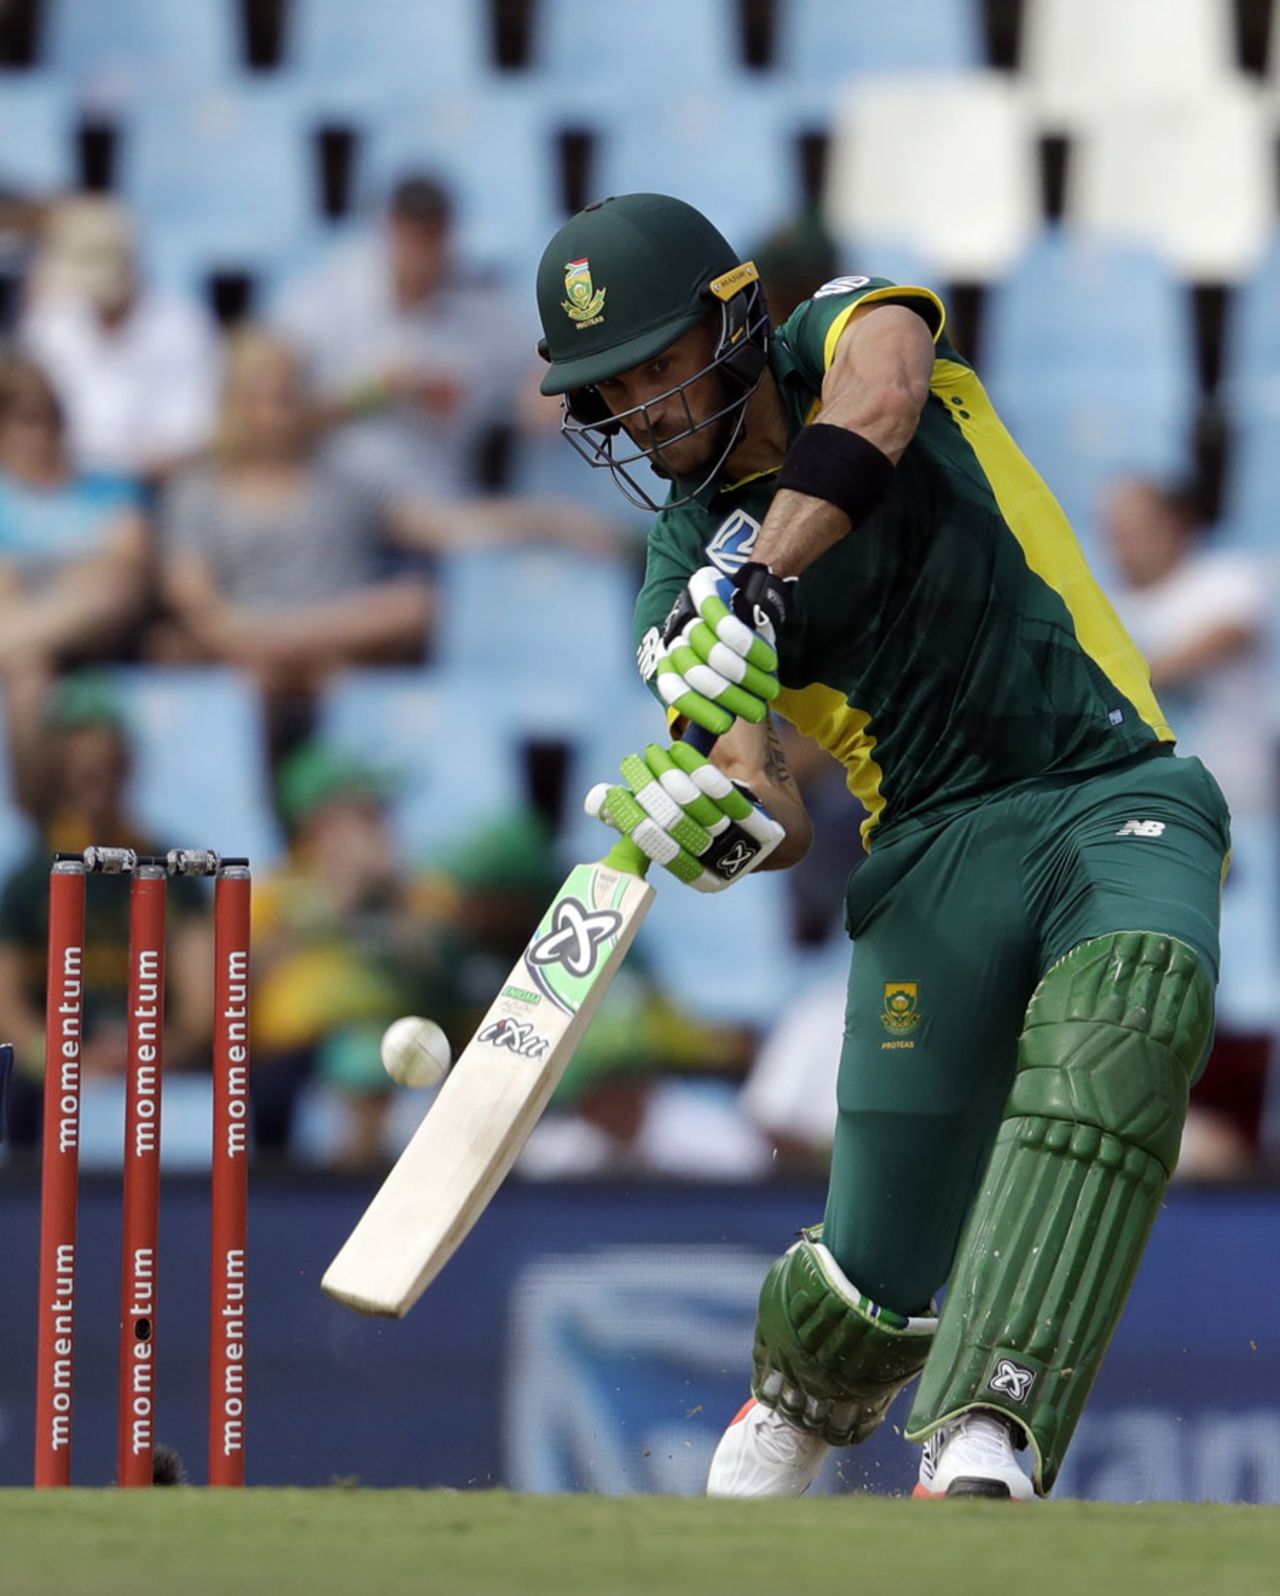 Faf du Plessis looked to put his foot down early, South Africa v Sri Lanka, 5th ODI, Centurion, February 10, 2017